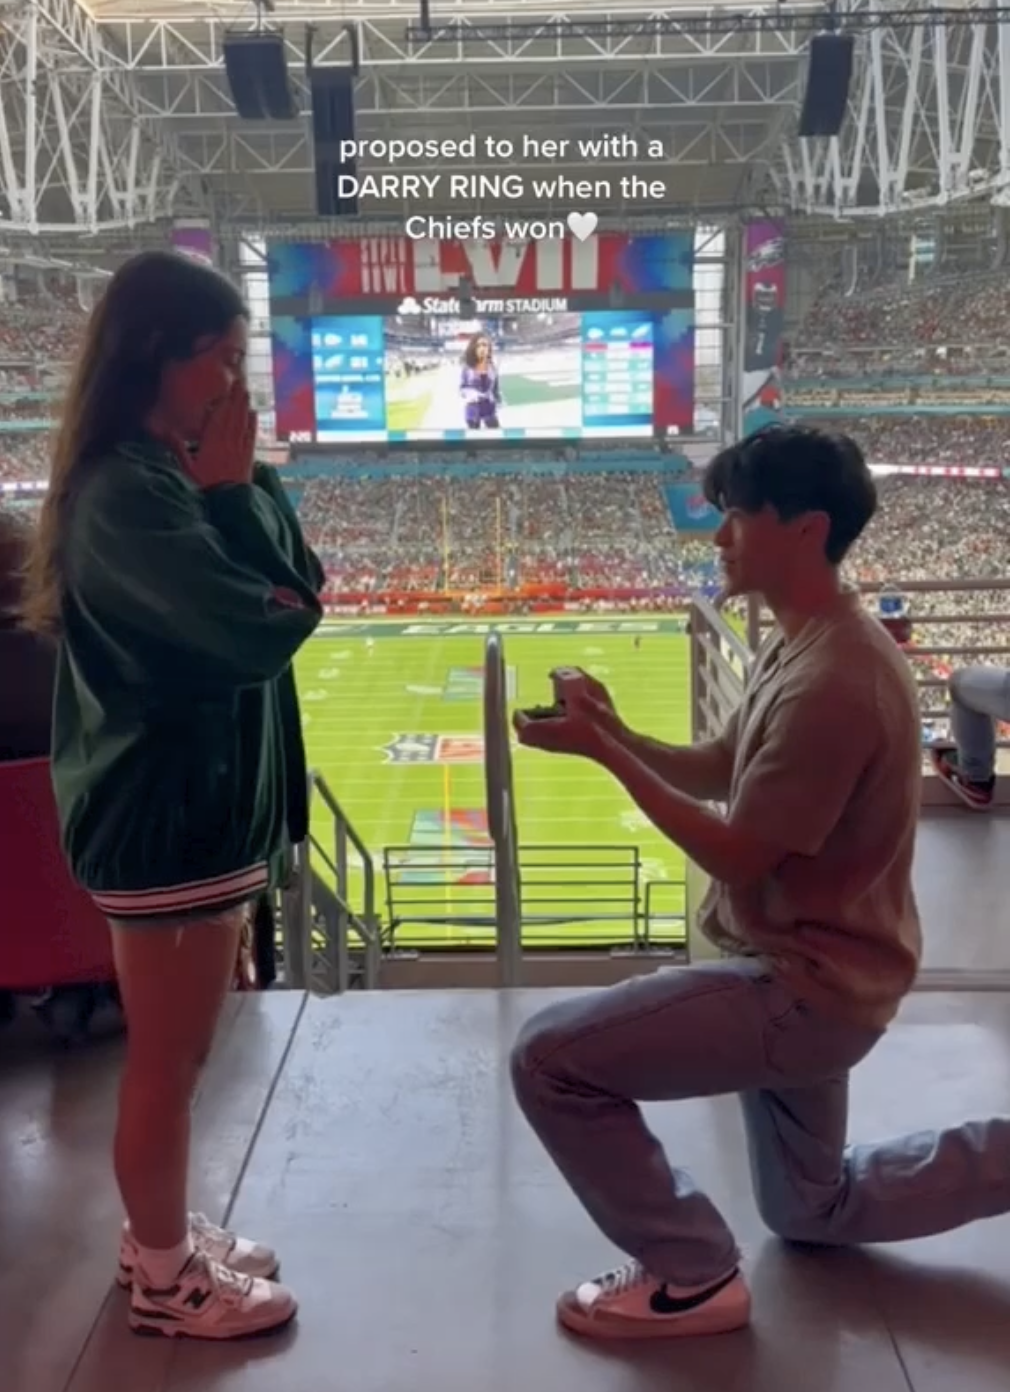 Asian Model Cedric Pham Proposed to His Girlfriend with Darry Ring